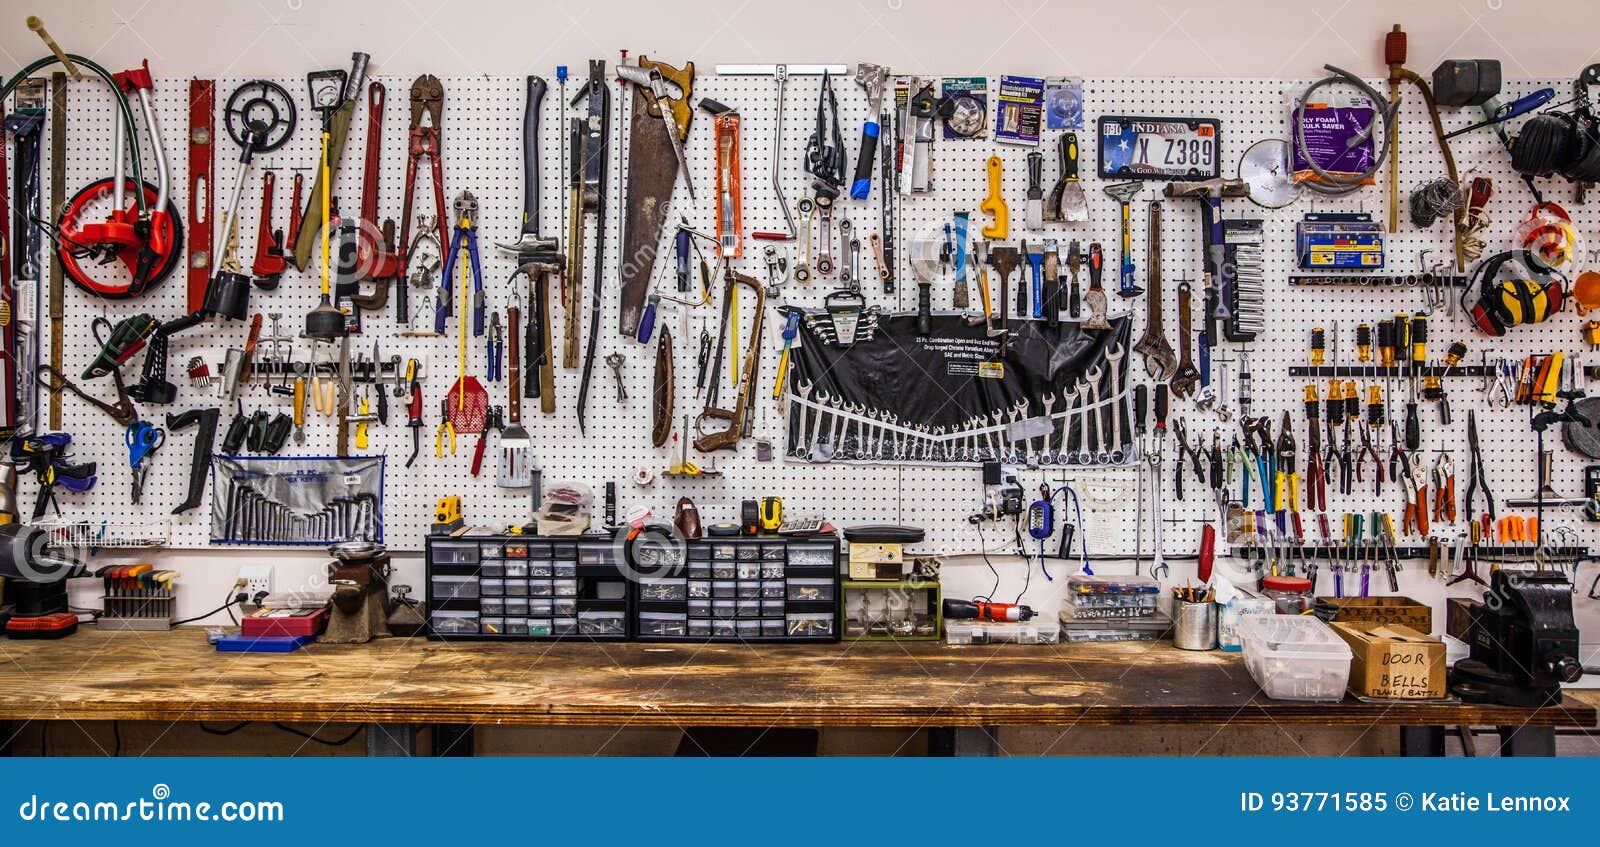 the great wall of tools